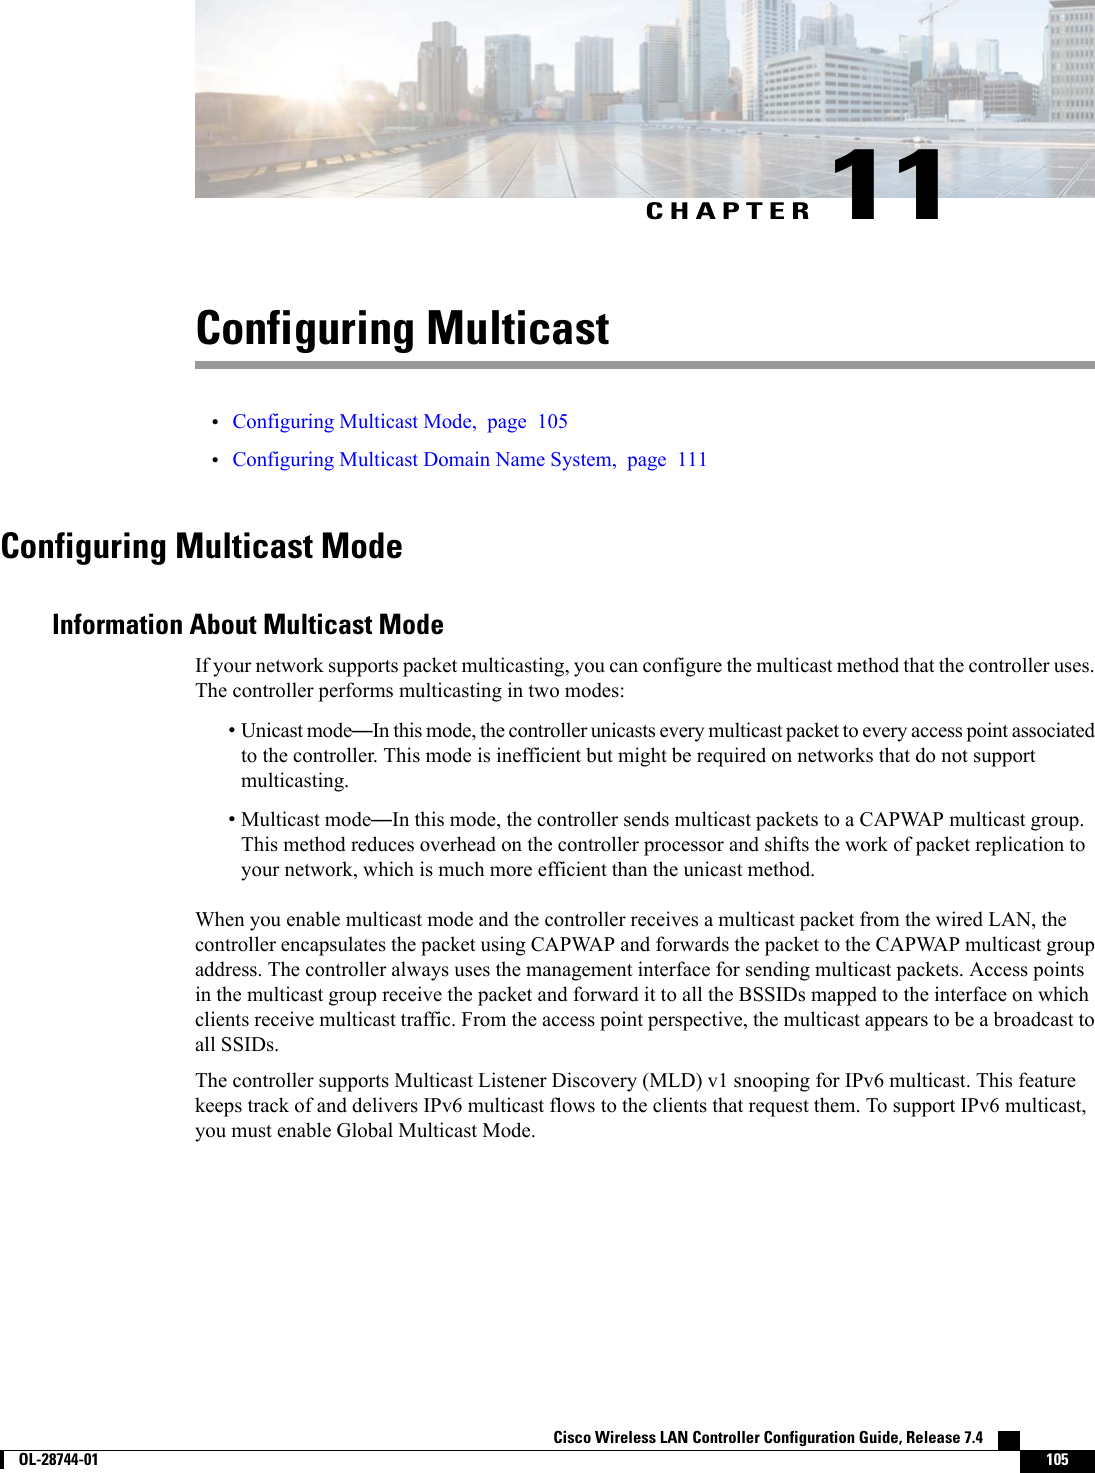 CHAPTER 11Configuring Multicast•Configuring Multicast Mode, page 105•Configuring Multicast Domain Name System, page 111Configuring Multicast ModeInformation About Multicast ModeIf your network supports packet multicasting, you can configure the multicast method that the controller uses.The controller performs multicasting in two modes:•Unicast mode—In this mode, the controller unicasts every multicast packet to every access point associatedto the controller. This mode is inefficient but might be required on networks that do not supportmulticasting.•Multicast mode—In this mode, the controller sends multicast packets to a CAPWAP multicast group.This method reduces overhead on the controller processor and shifts the work of packet replication toyour network, which is much more efficient than the unicast method.When you enable multicast mode and the controller receives a multicast packet from the wired LAN, thecontroller encapsulates the packet using CAPWAP and forwards the packet to the CAPWAP multicast groupaddress. The controller always uses the management interface for sending multicast packets. Access pointsin the multicast group receive the packet and forward it to all the BSSIDs mapped to the interface on whichclients receive multicast traffic. From the access point perspective, the multicast appears to be a broadcast toall SSIDs.The controller supports Multicast Listener Discovery (MLD) v1 snooping for IPv6 multicast. This featurekeeps track of and delivers IPv6 multicast flows to the clients that request them. To support IPv6 multicast,you must enable Global Multicast Mode.Cisco Wireless LAN Controller Configuration Guide, Release 7.4        OL-28744-01 105